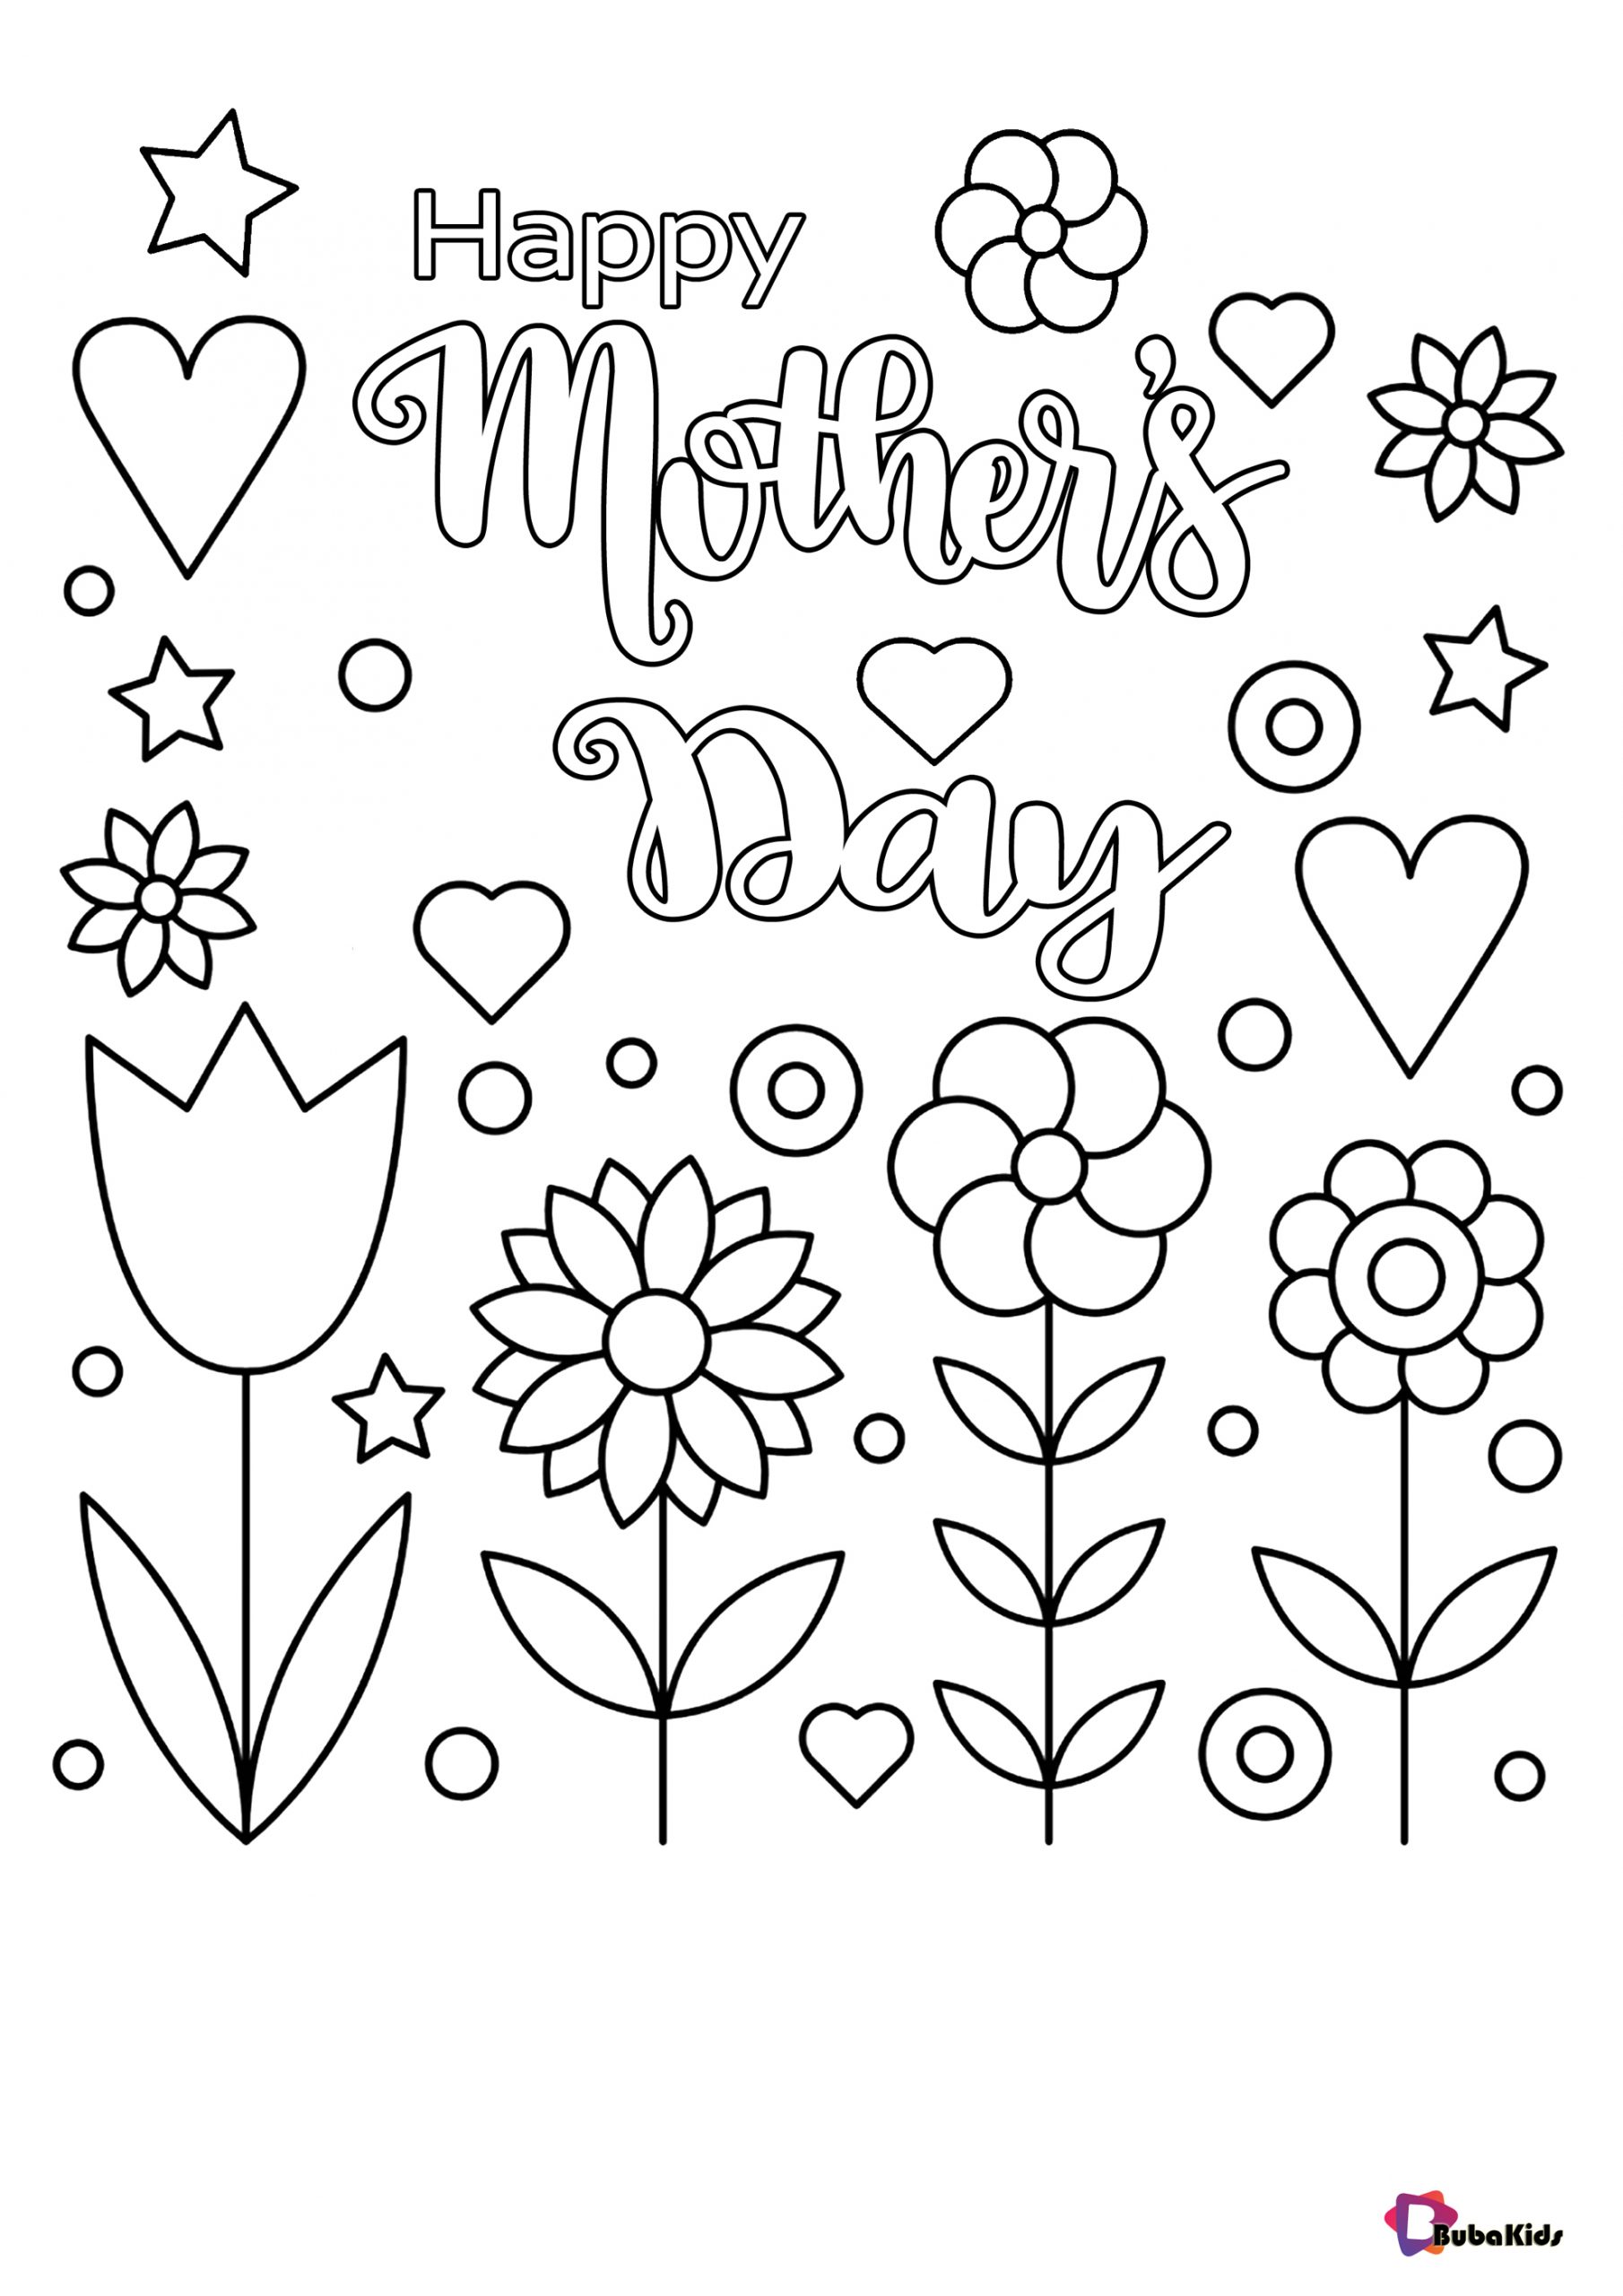 Happy mother’s day coloring pages happy tulips flowers hearts